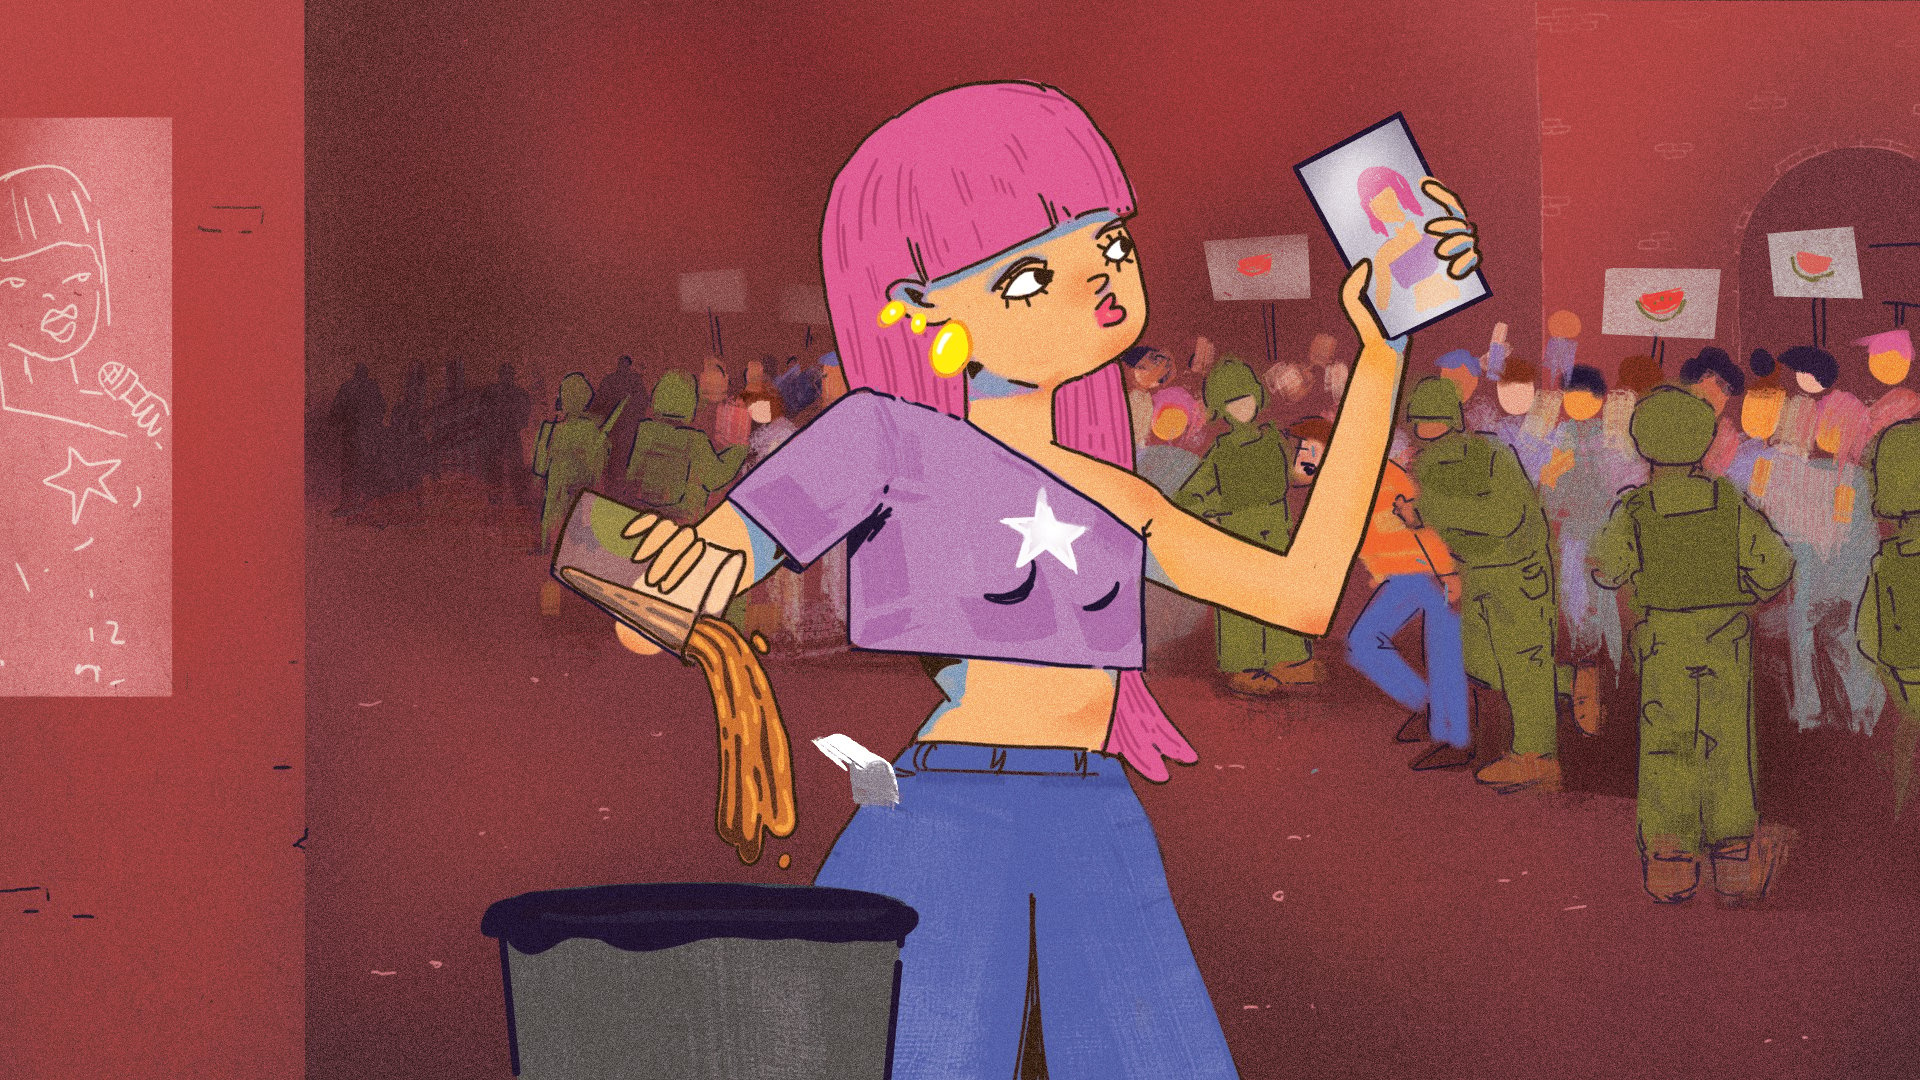 An illustration of a woman filming herself pouring out a coffee as a crowd of protesters and police clash behind her.